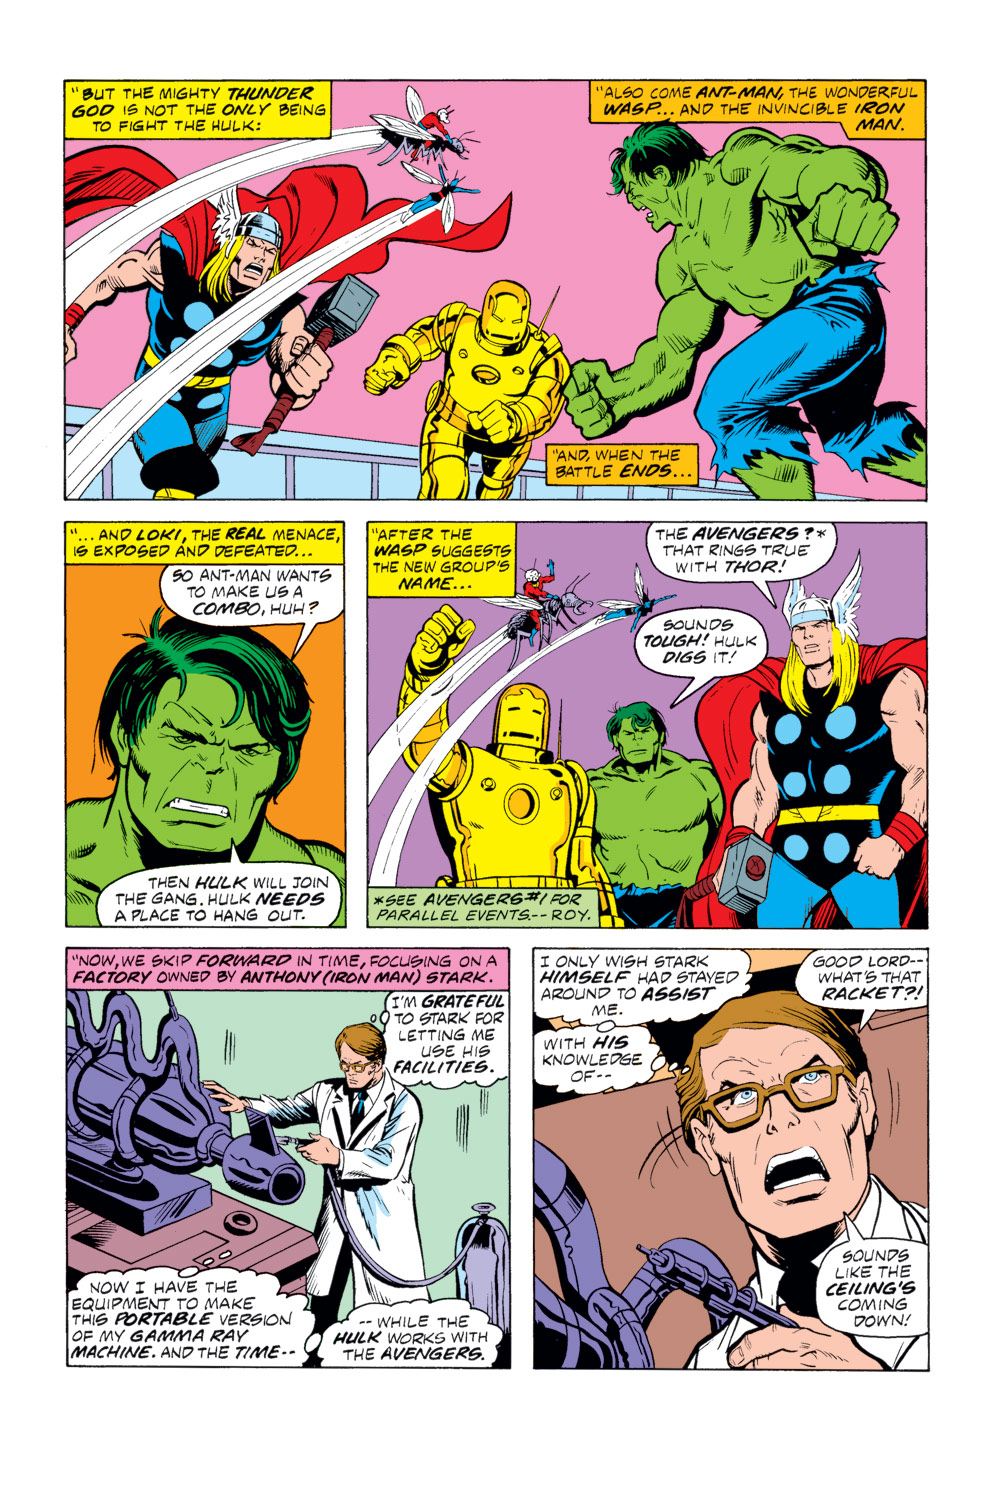 What If? (1977) issue 12 - Rick Jones had become the Hulk - Page 11